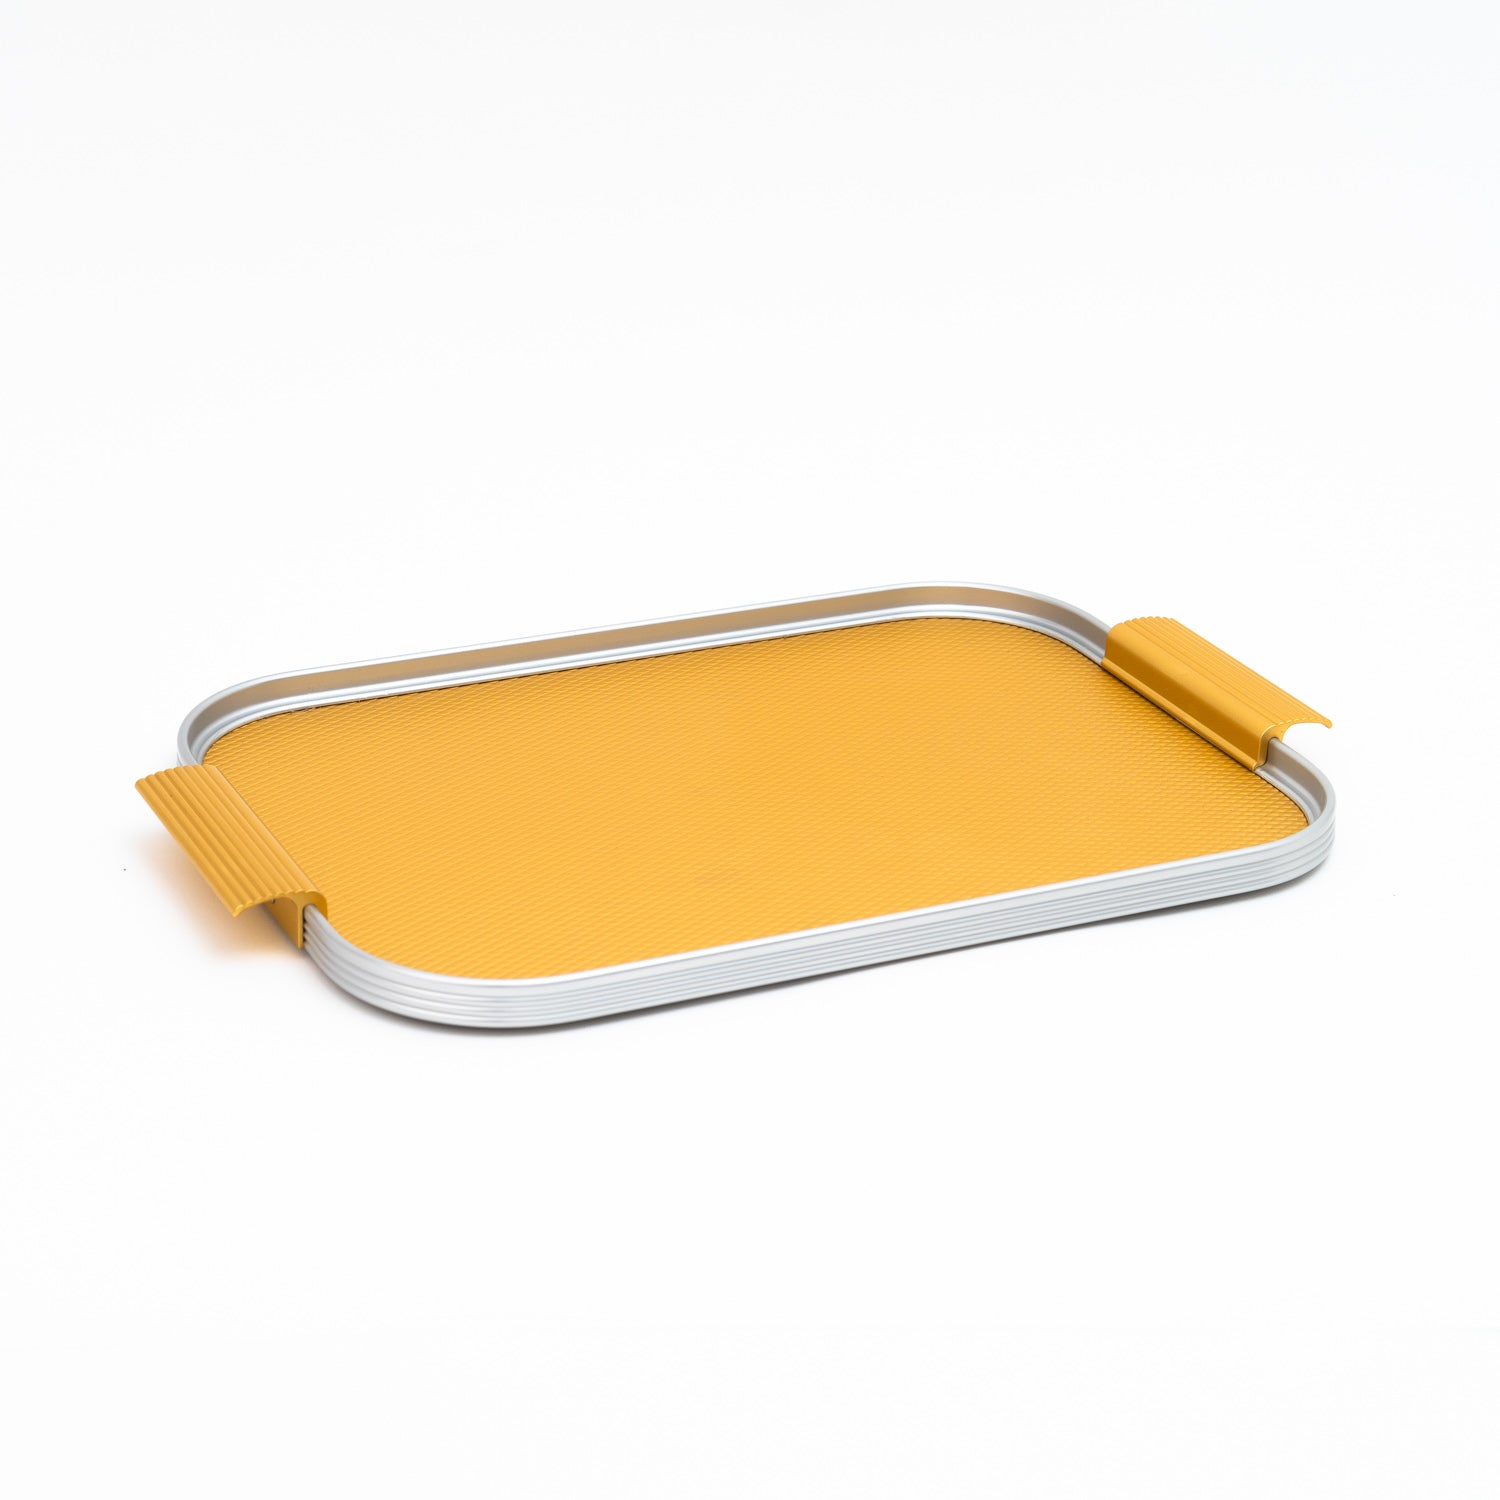 Kaymet Ribbed tray special edition silver gold